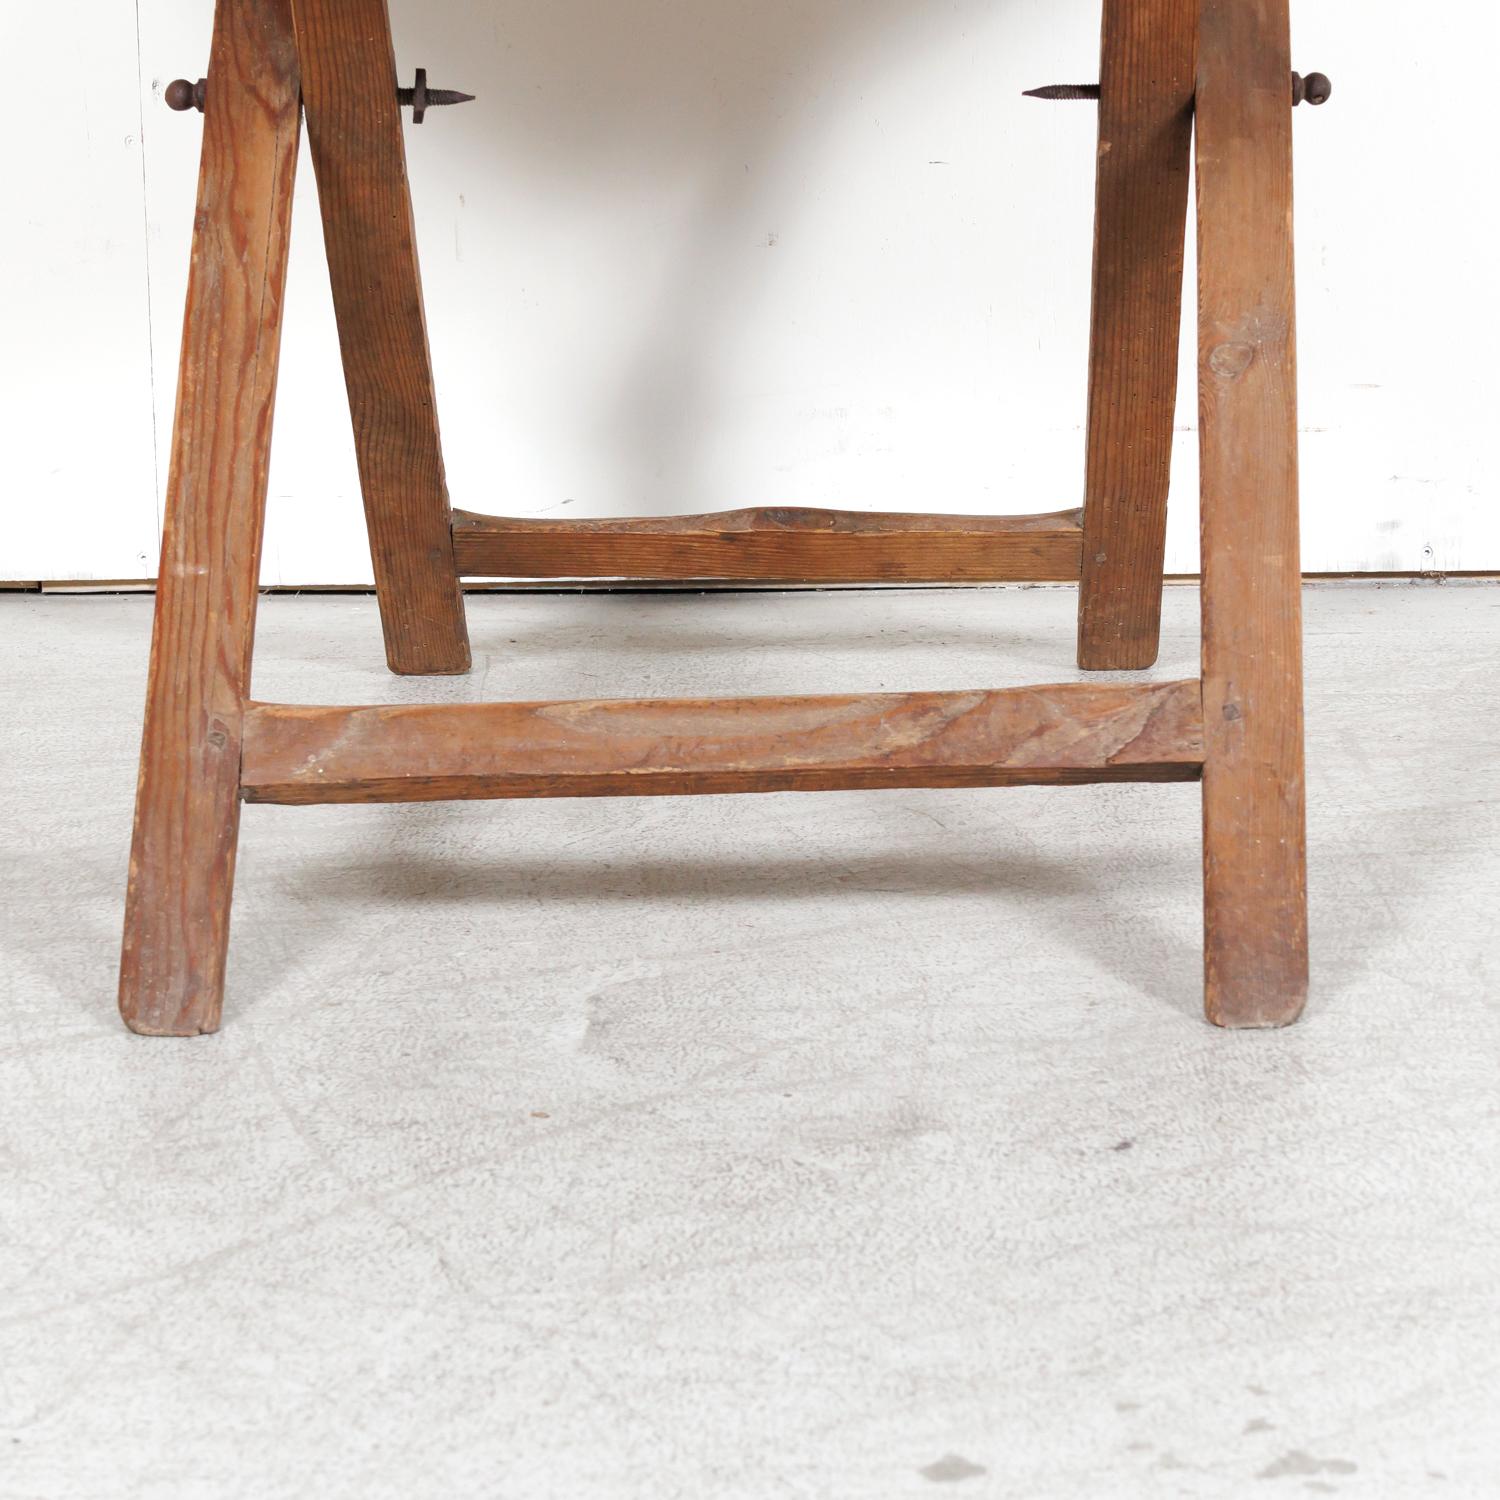 19th Century Rustic French Pine Campaign or Coach Folding Table For Sale 9